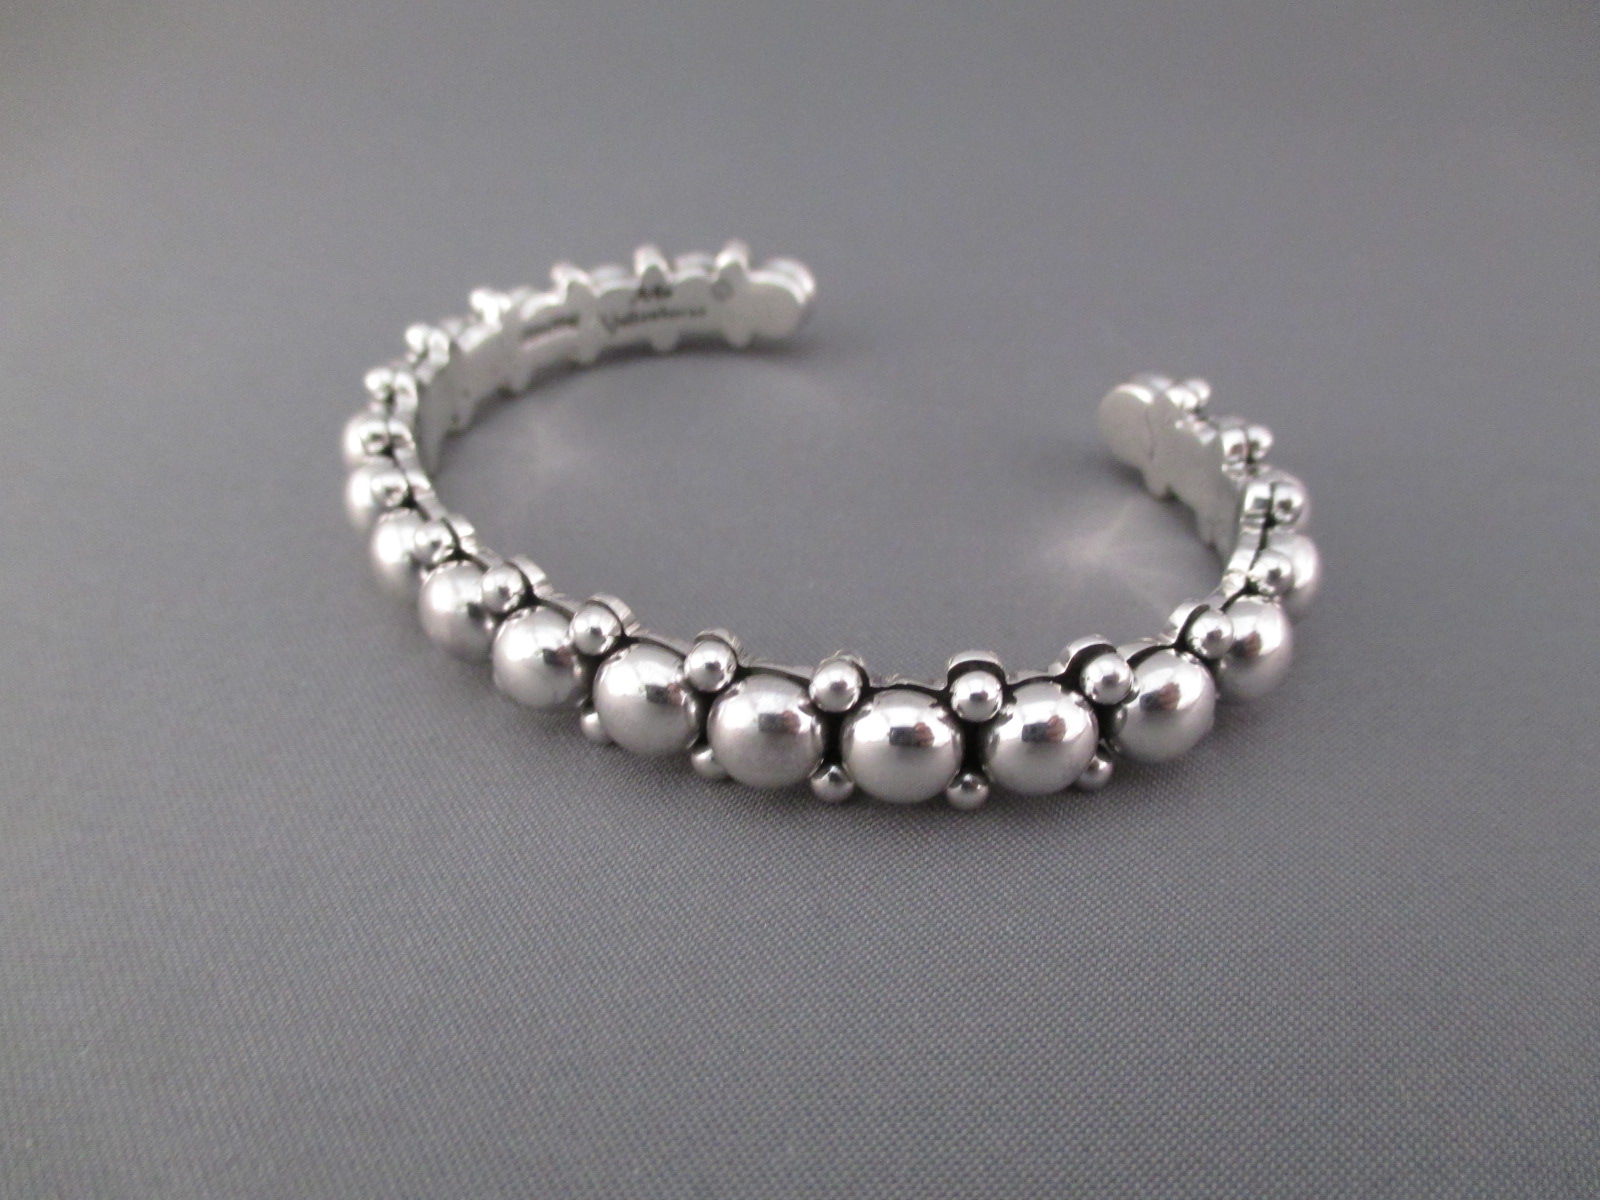 Sterling Silver Cuff Bracelet Jewelry with Dots by Artie Yellowhorse